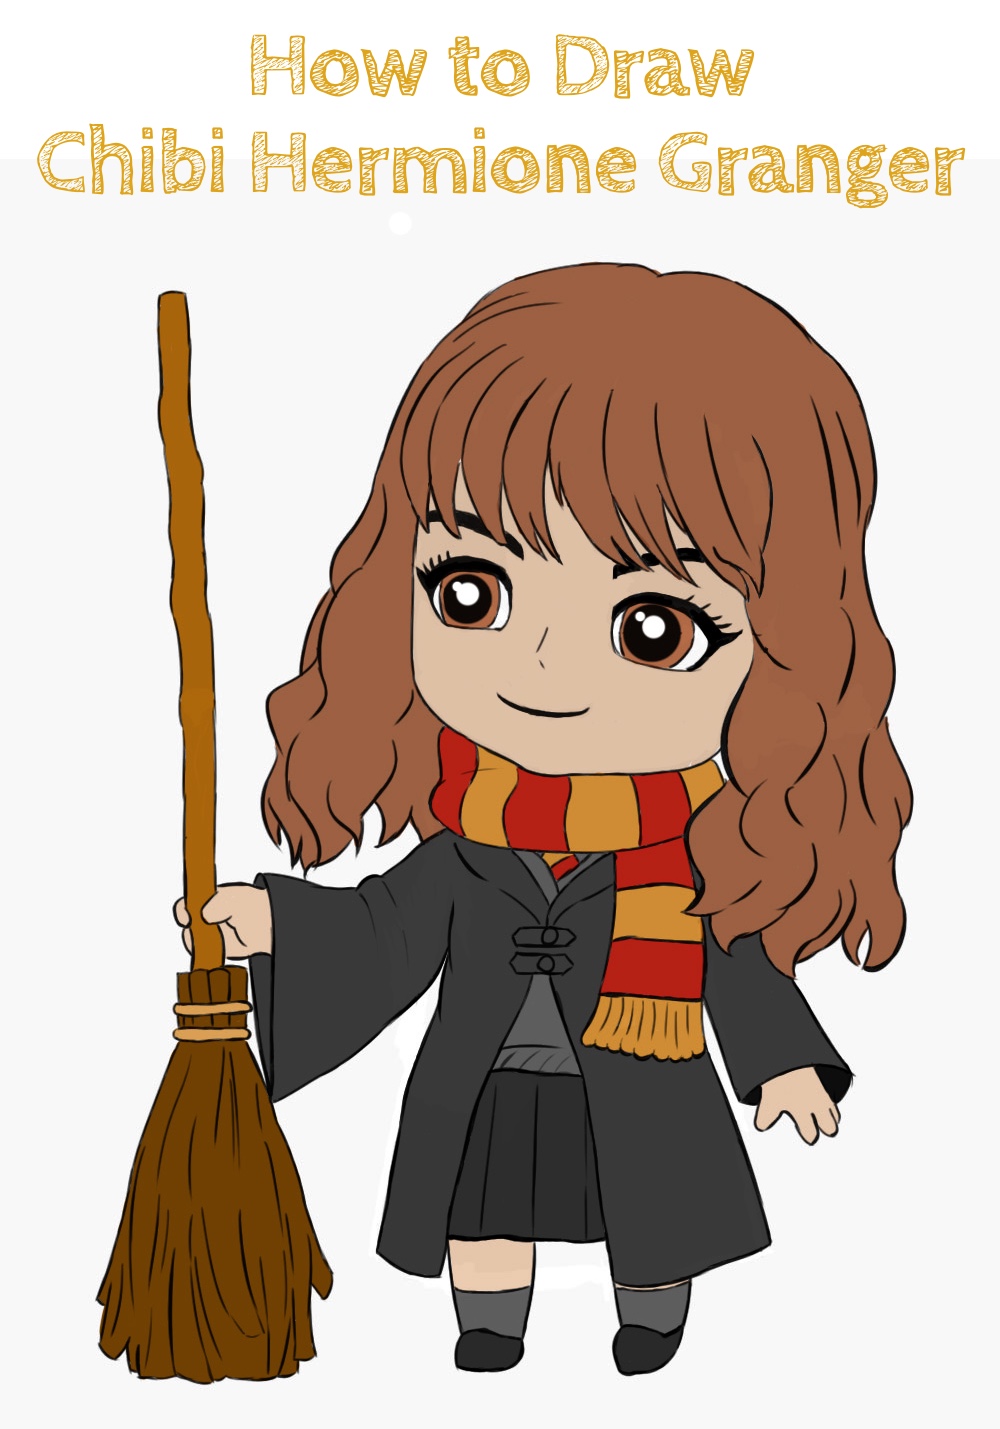 How to Draw Chibi Hermione Granger - How to Draw Easy